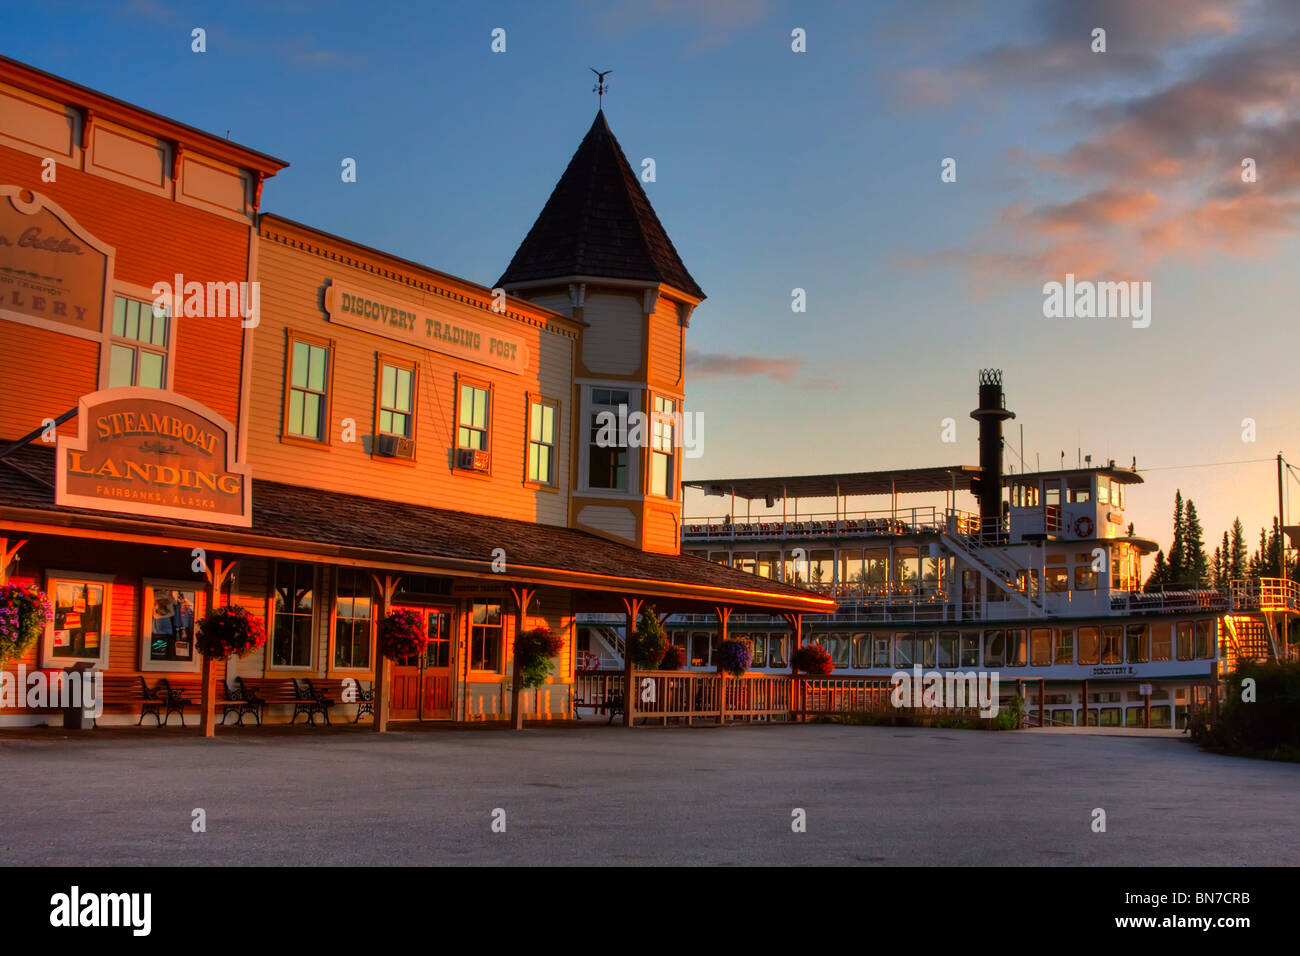 Buildings near the Riverboat Discovery dock with Discovery in the background at sunset, Fairbanks, Alaska, HDR image Stock Photo